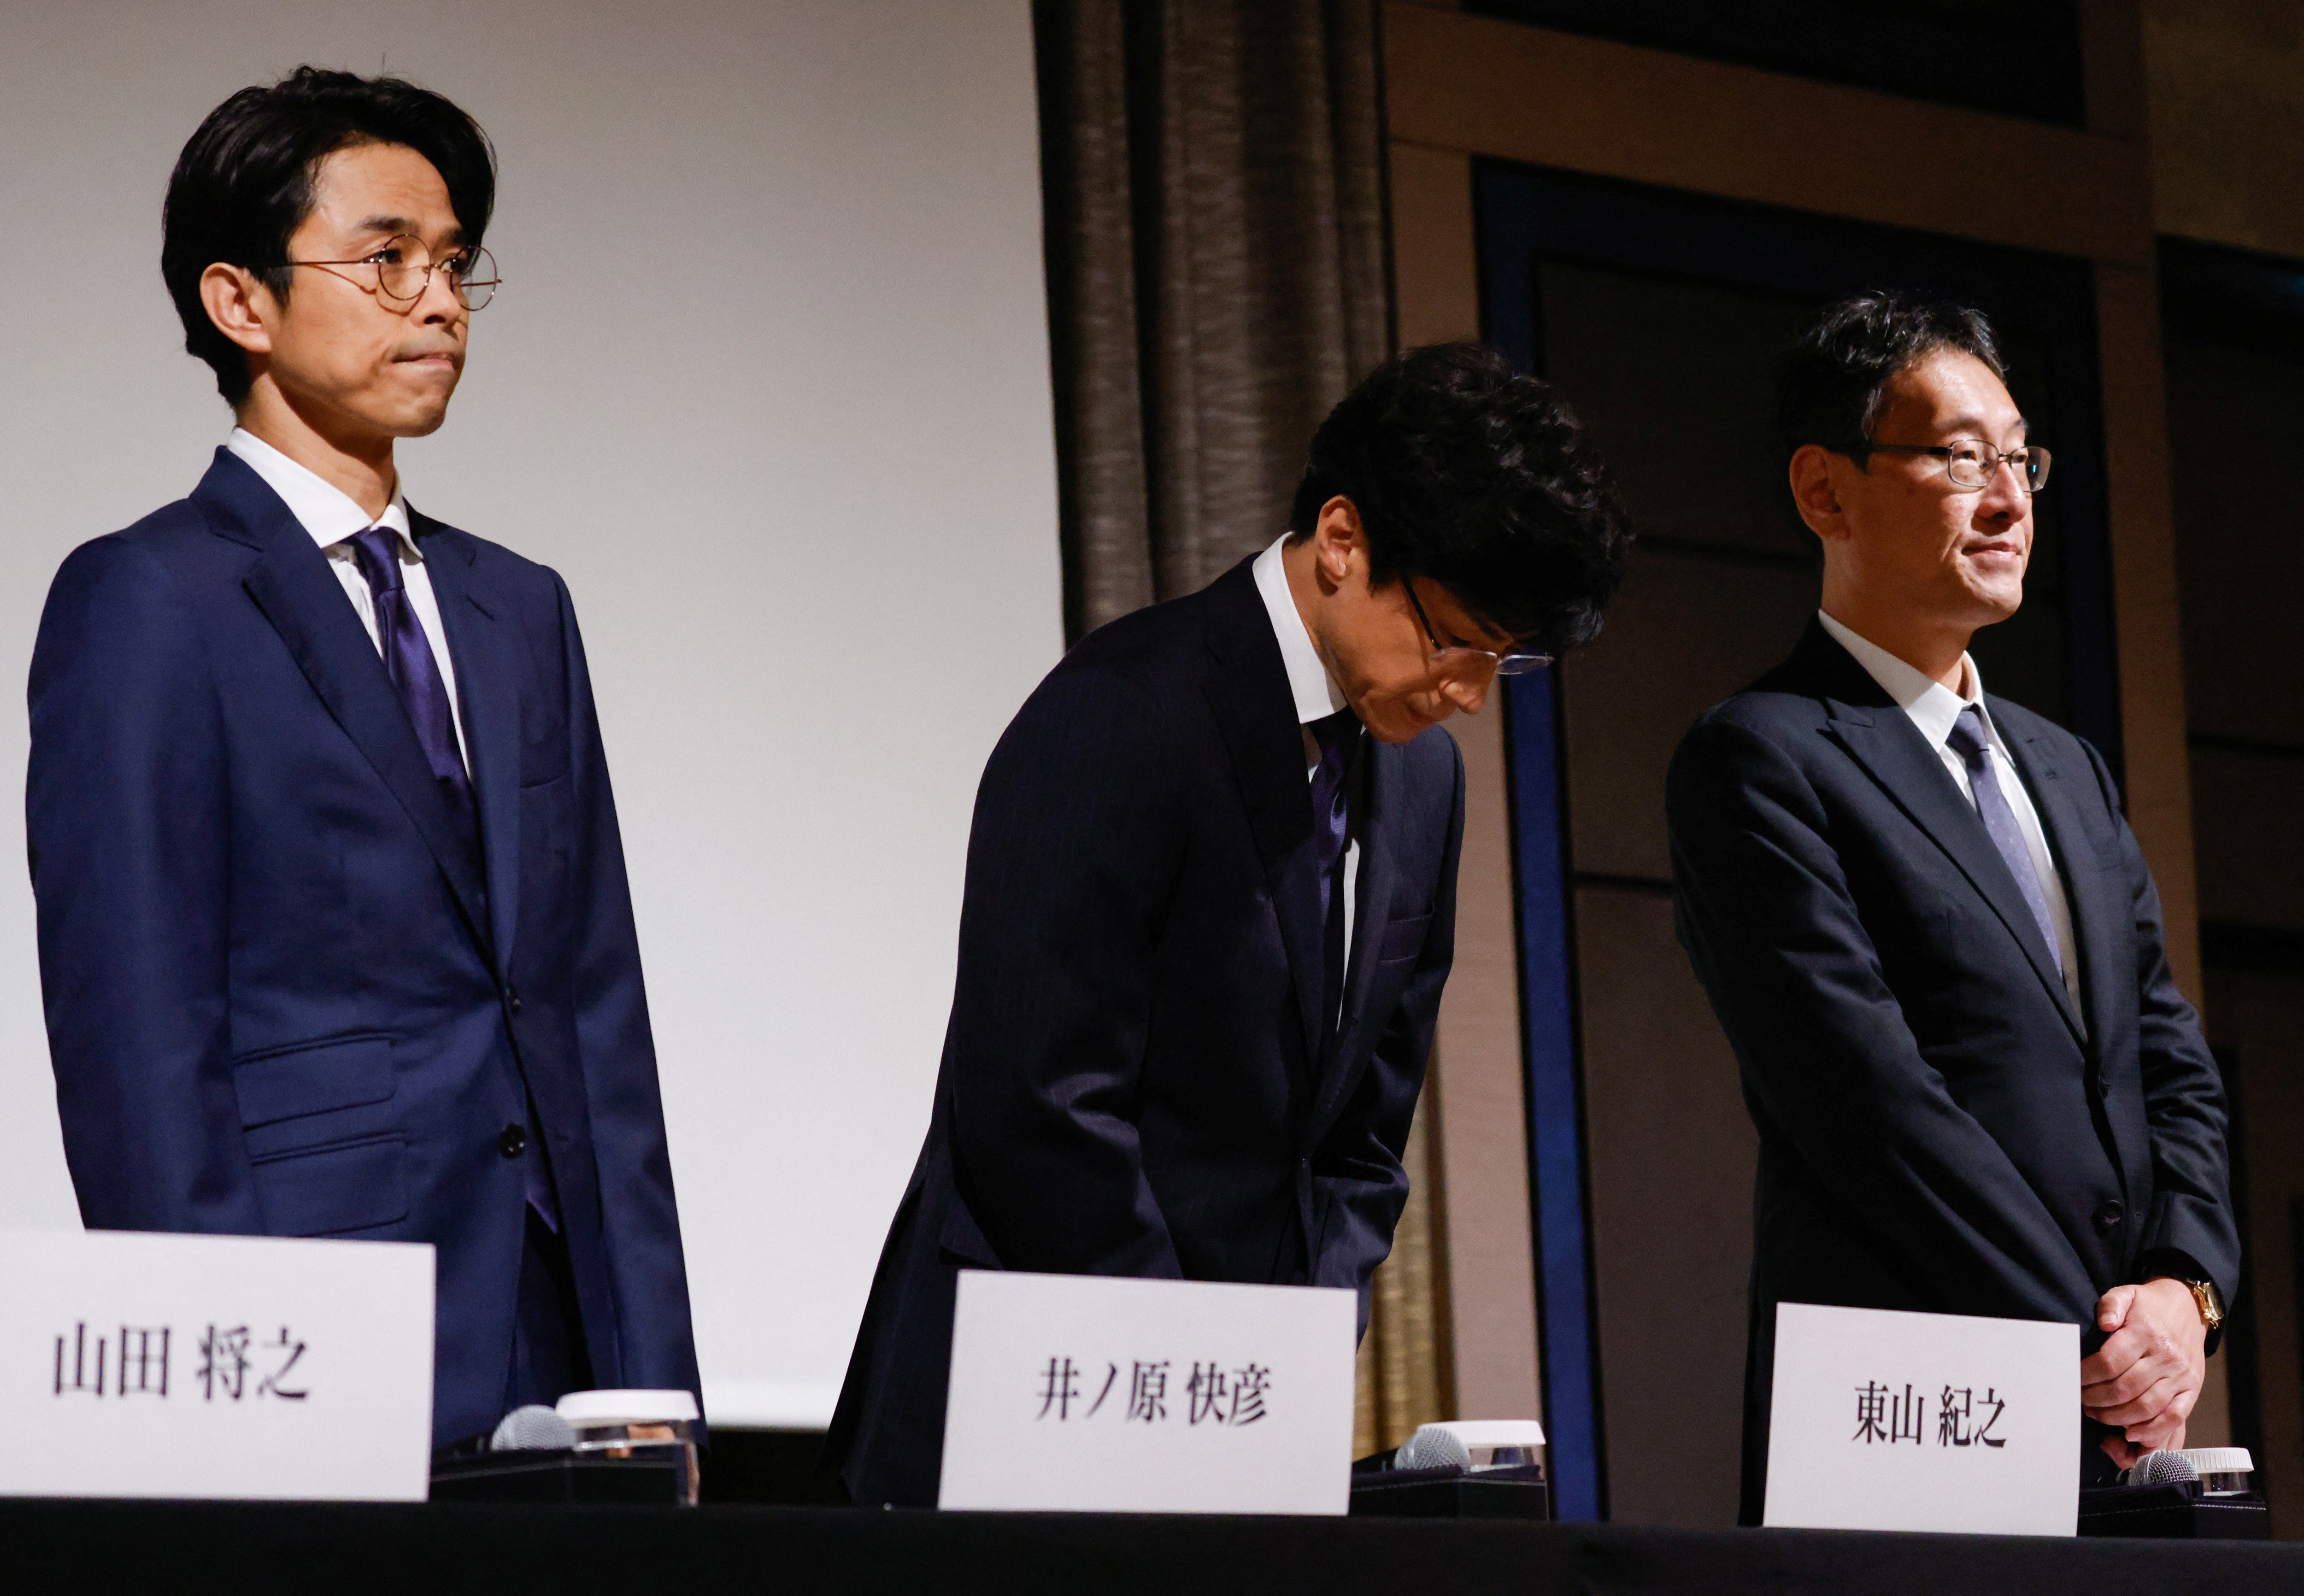 Japan's talent agency Johnny & Associates Chief Noriyuki Higashiyama, flanked by CEO of Johnny's Island Yoshihiko Inohara and their lawyer Hiroshi Kimeda, bows at the start of their news conference in Tokyo, Japan, October 2, 2023. Photo: Reuters